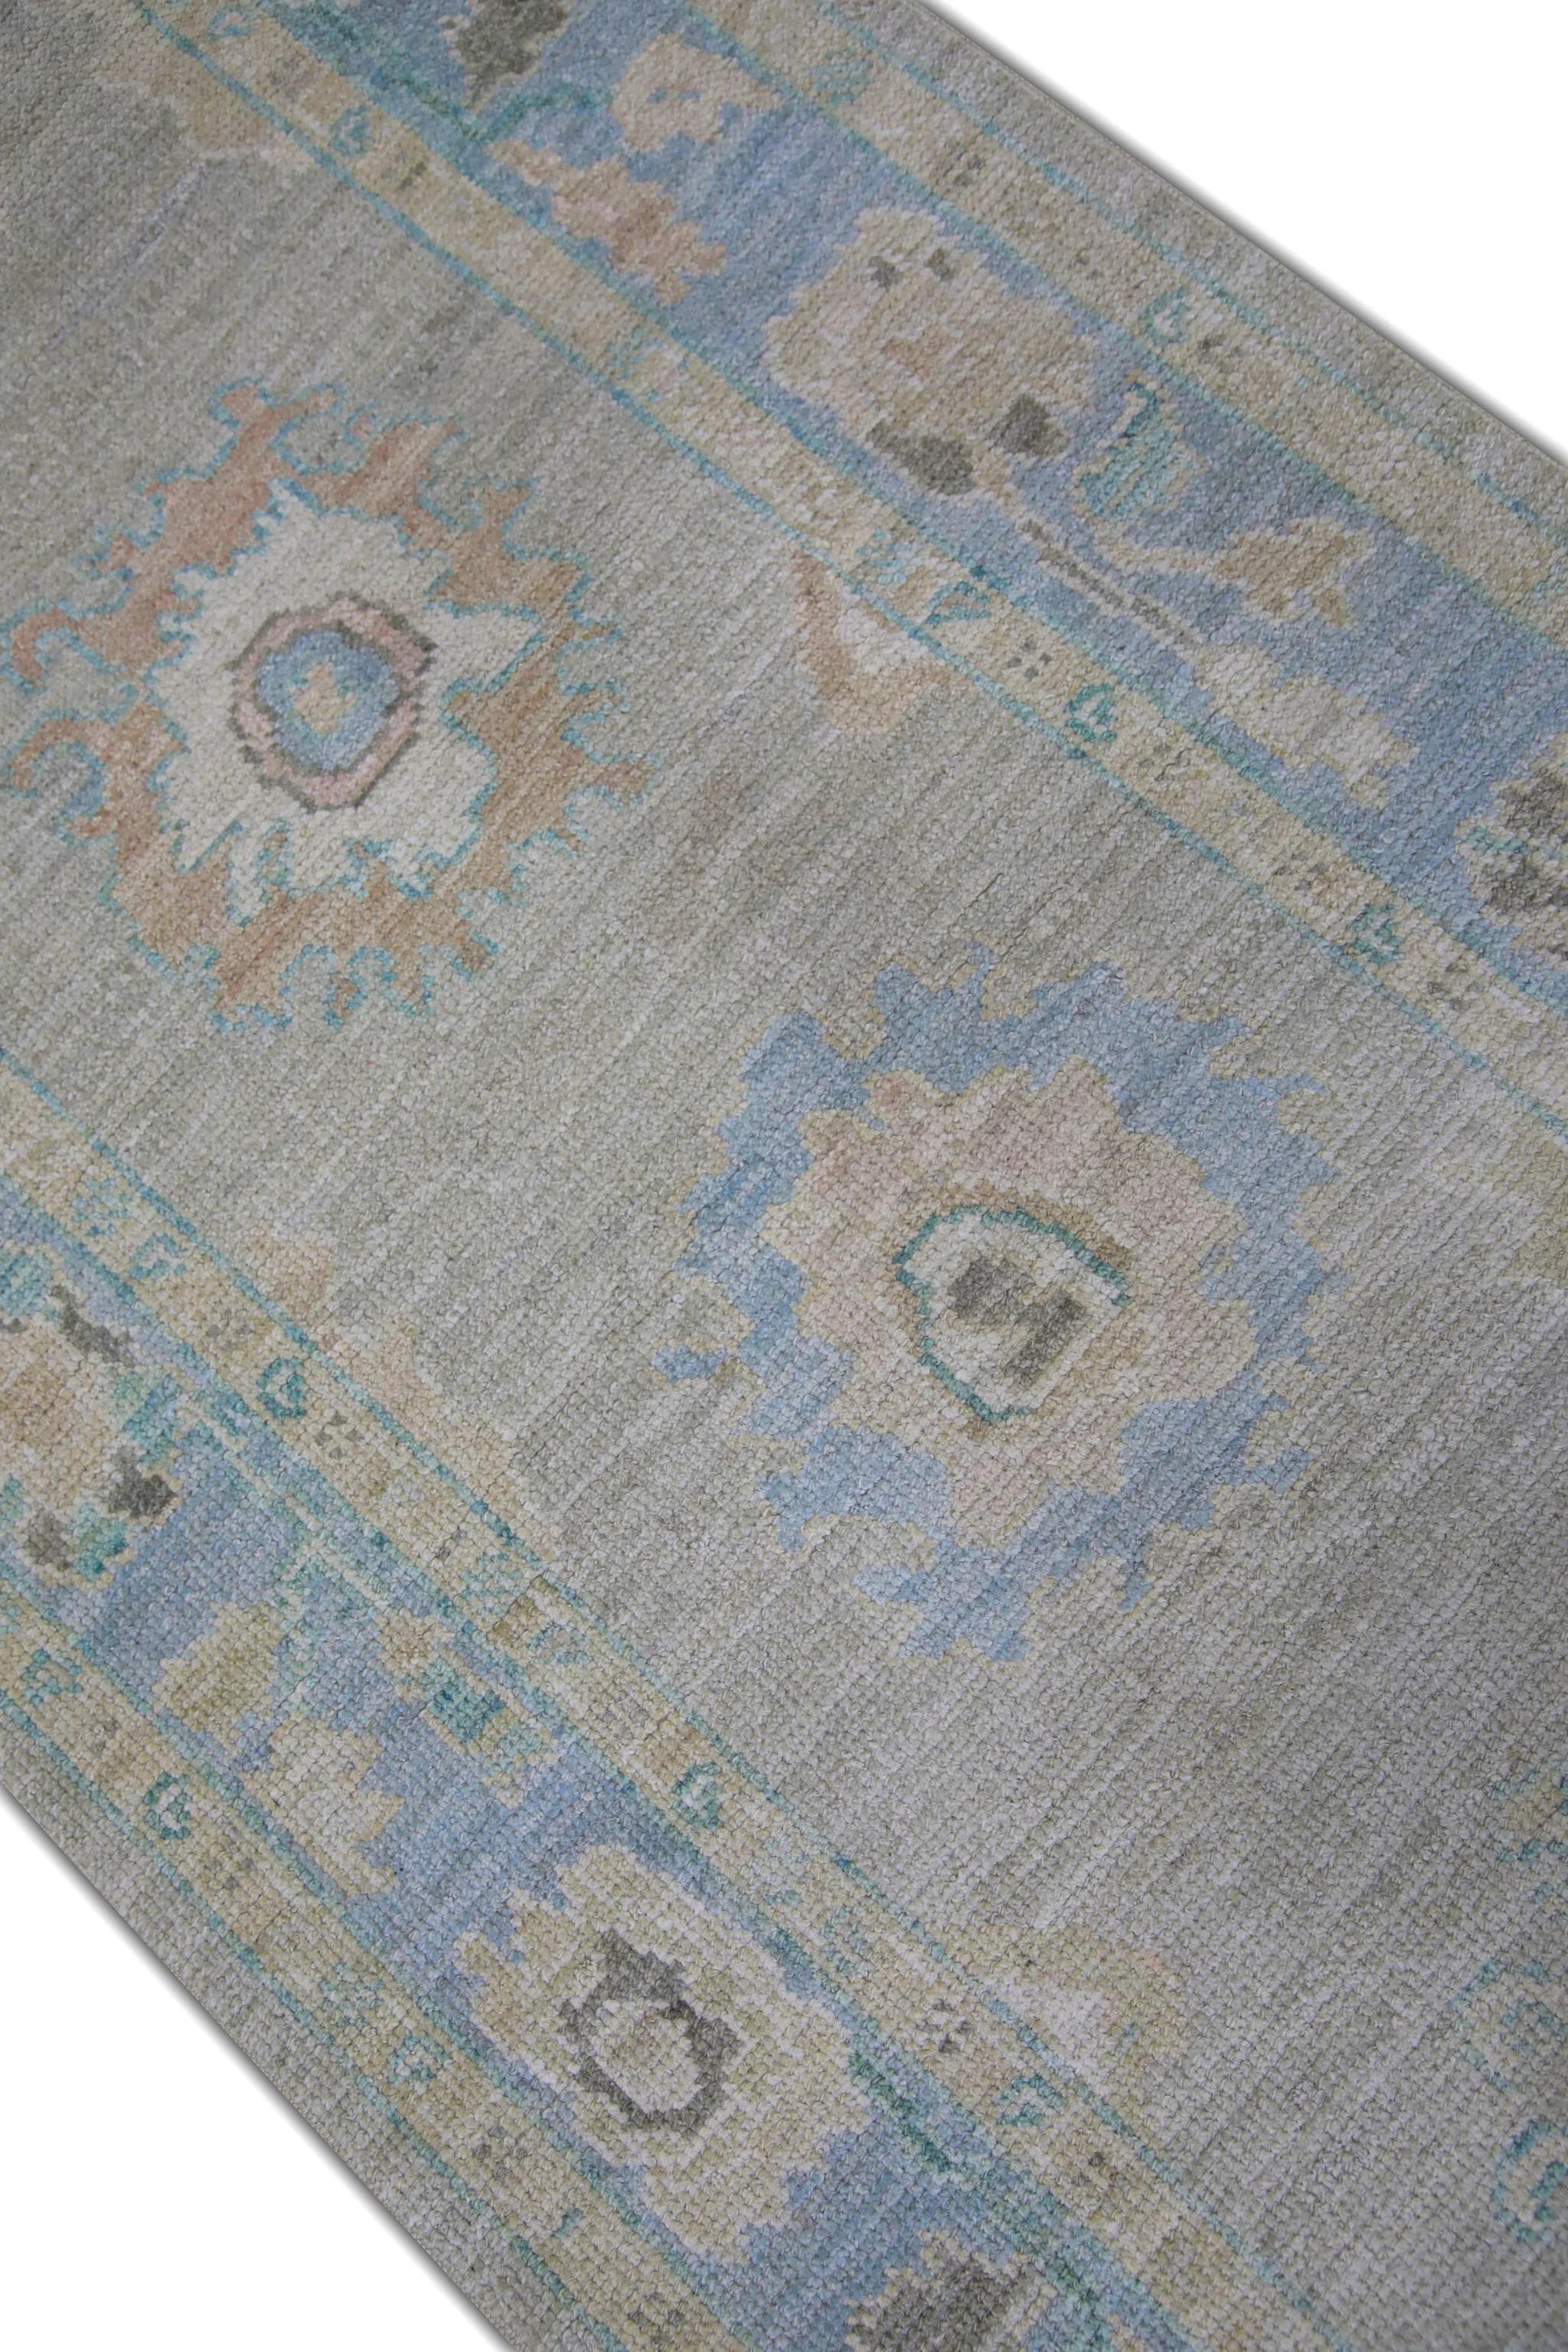 Contemporary Blue w/ Multicolor Floral Design Handwoven Wool Turkish Oushak Rug 3' x 10'3